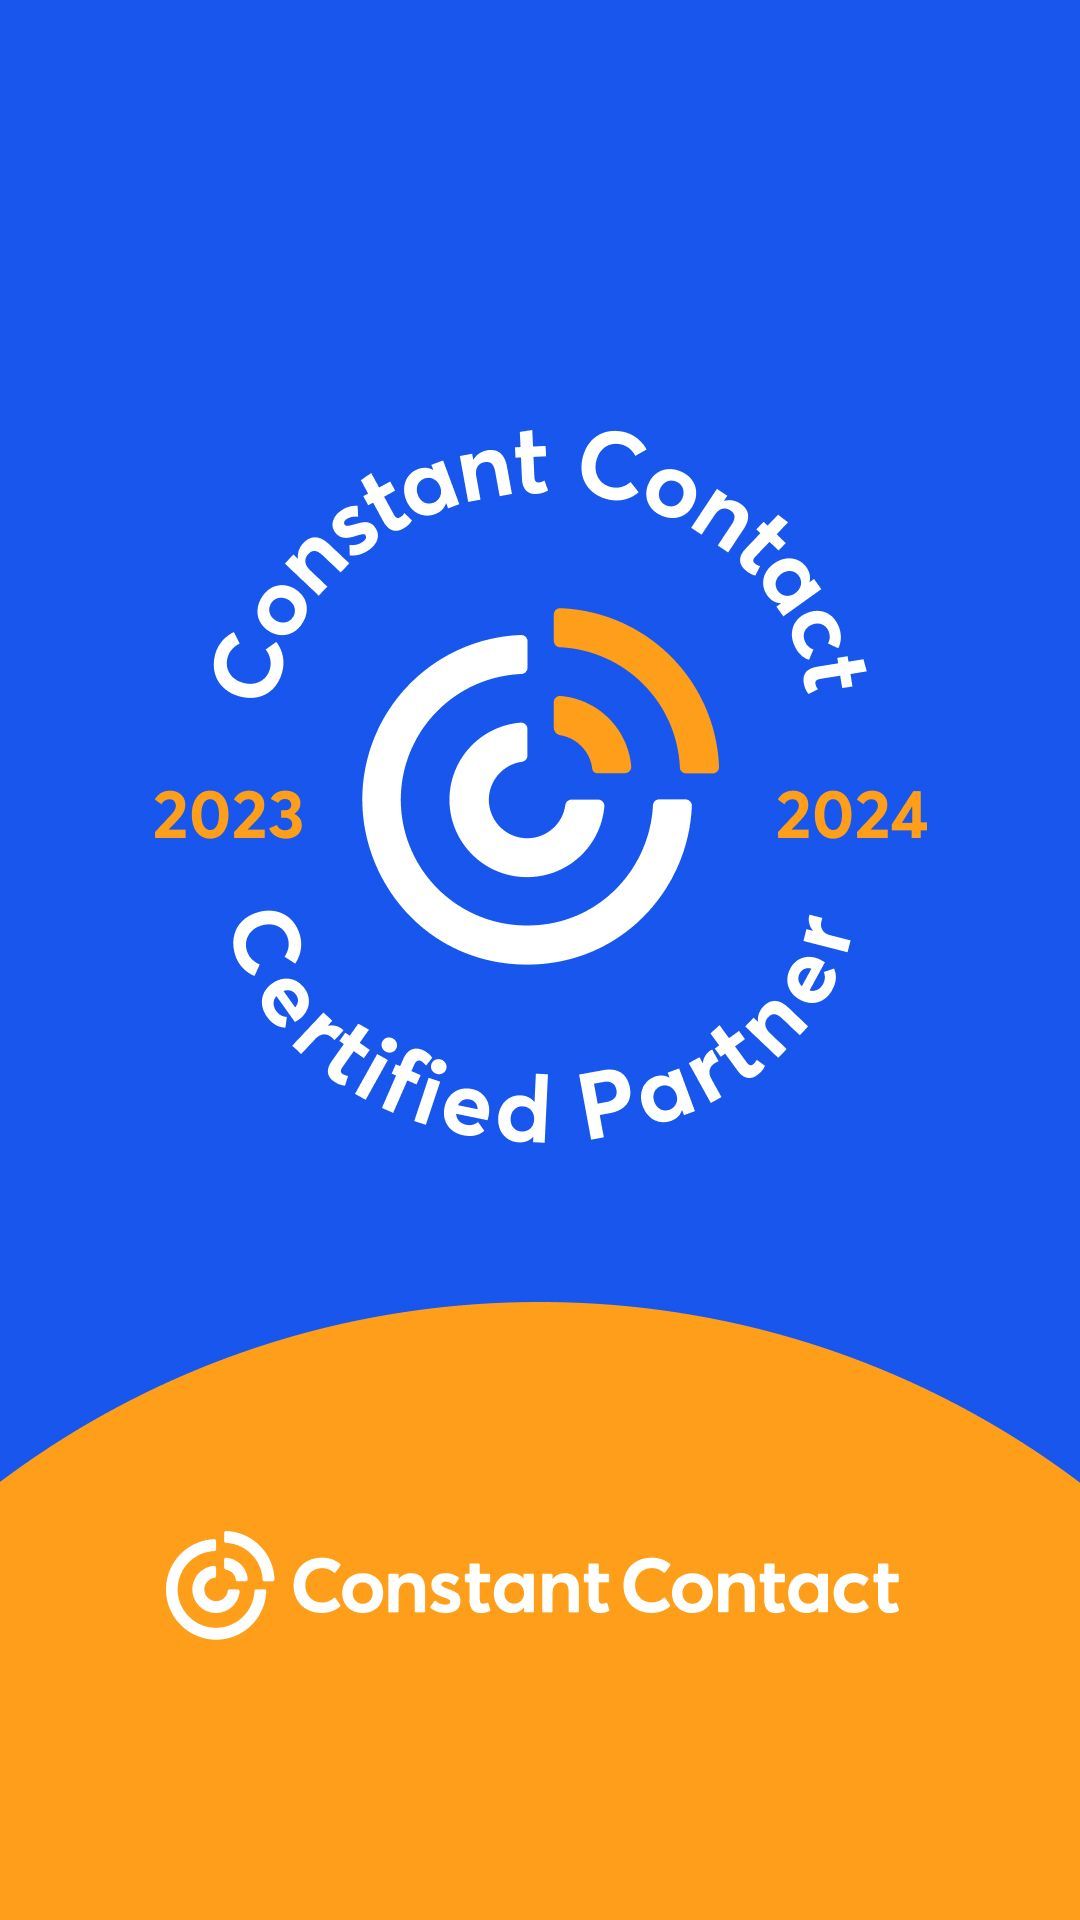 a constant contact certified partner logo on a blue and orange background .